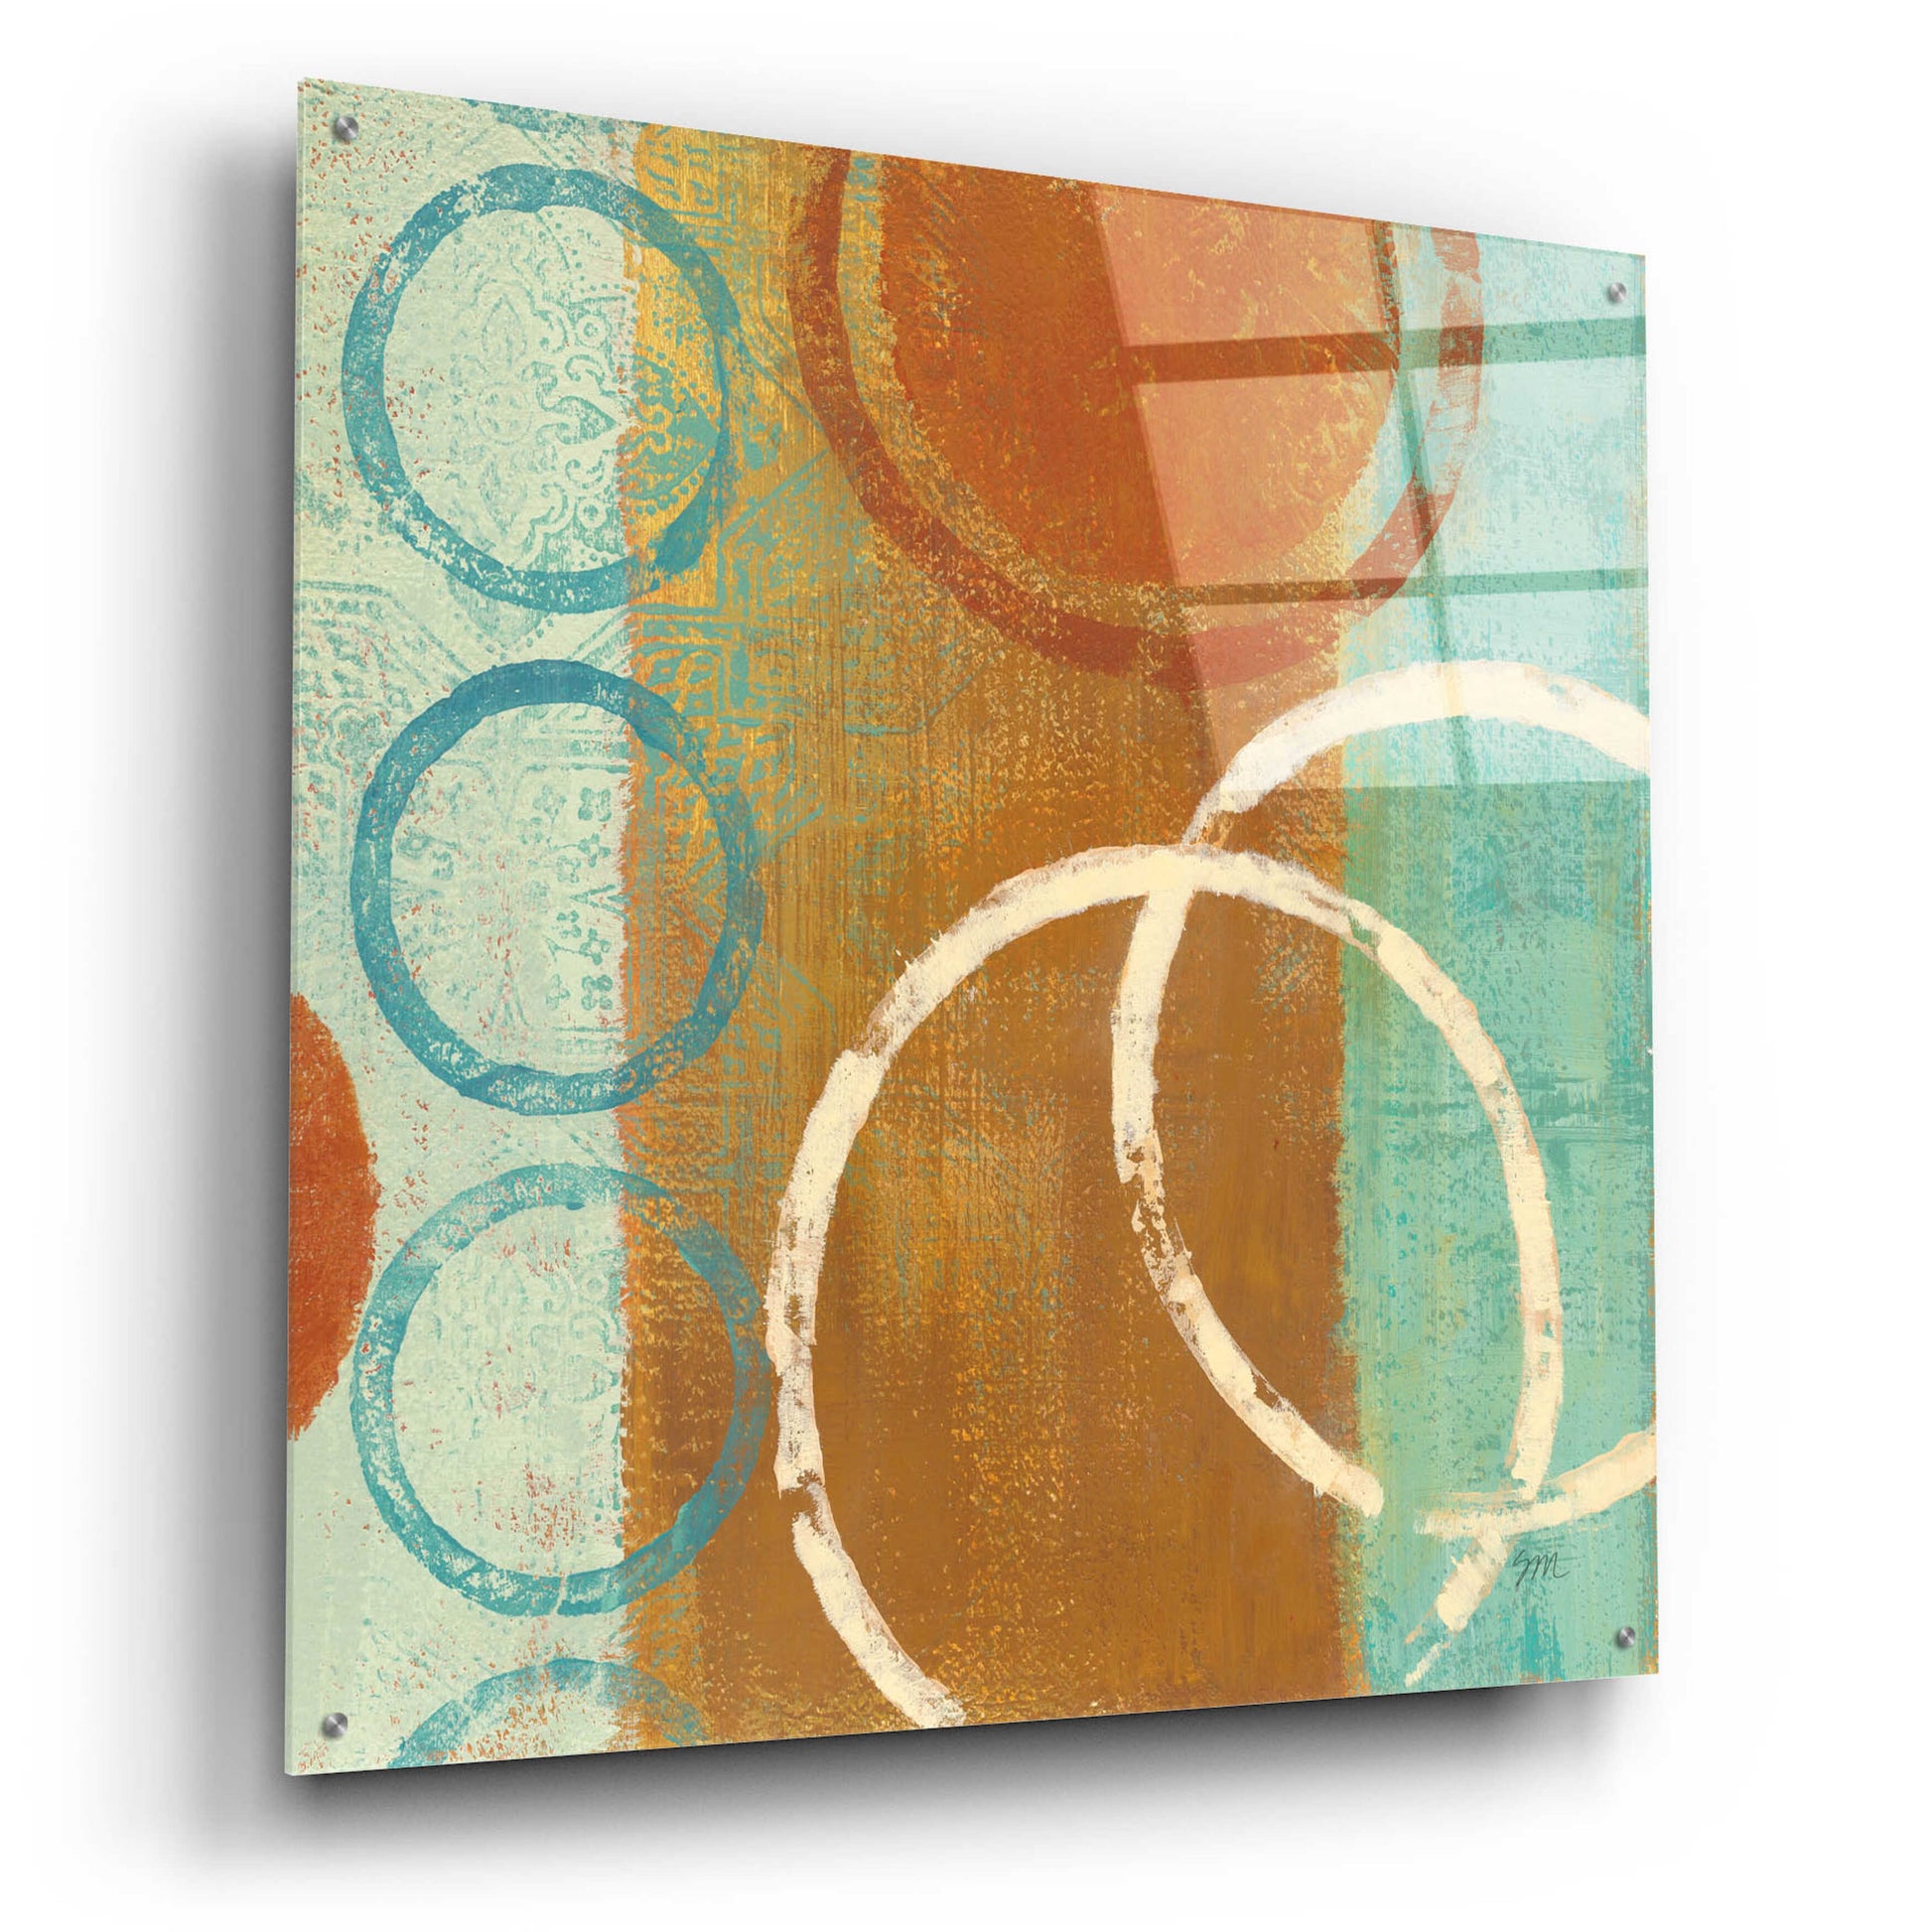 Epic Art 'Abstract of Circles' by Studio Mousseau, Acrylic Glass Wall Art,36x36